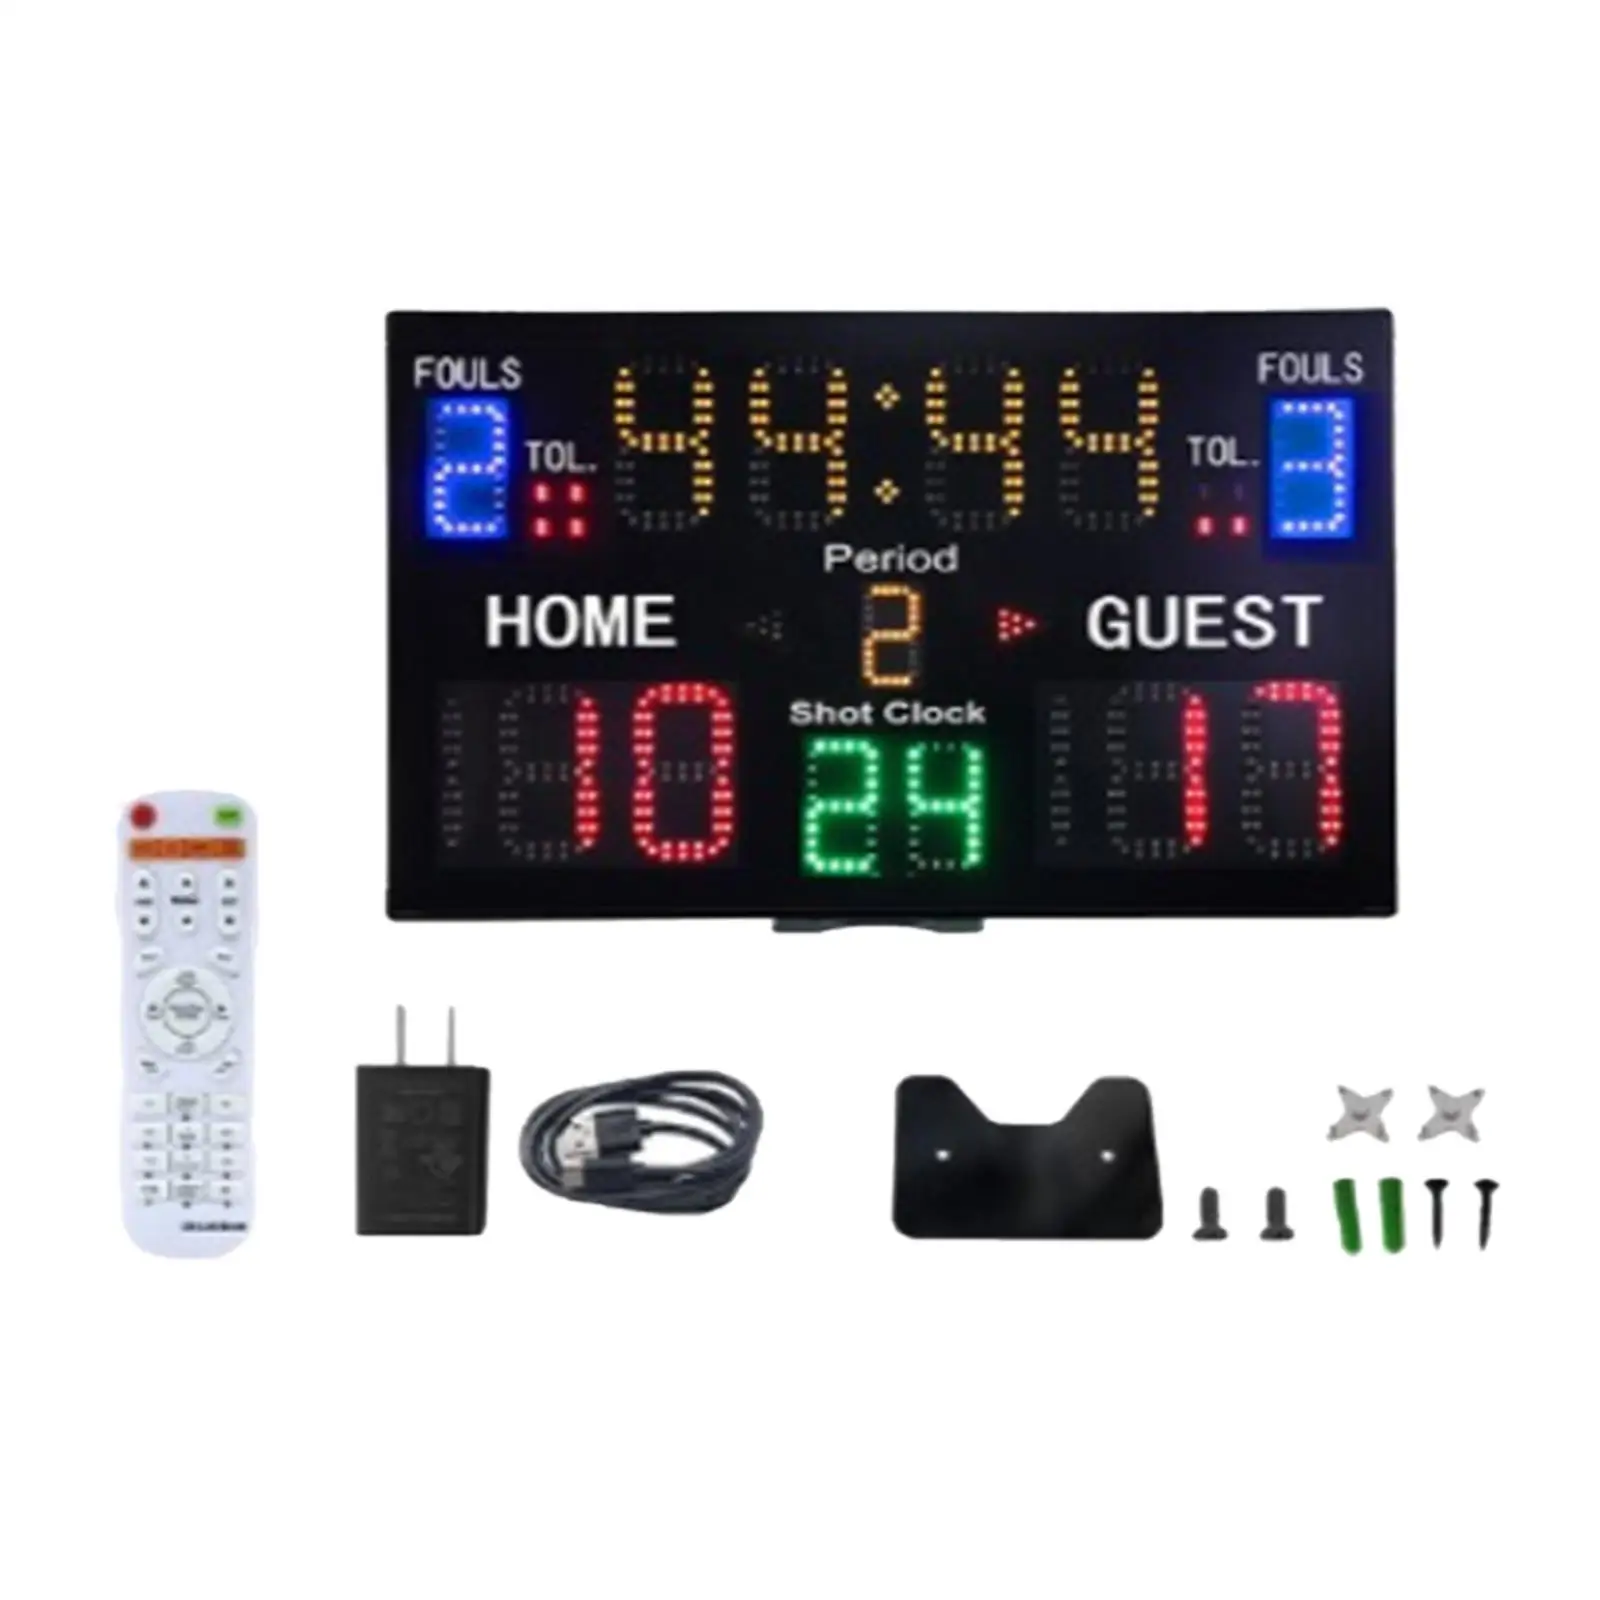 Professional Indoor Basketball Scoreboard Score Wall Hanging Remote Control Electronic Scoreboard for Volleyball Sports